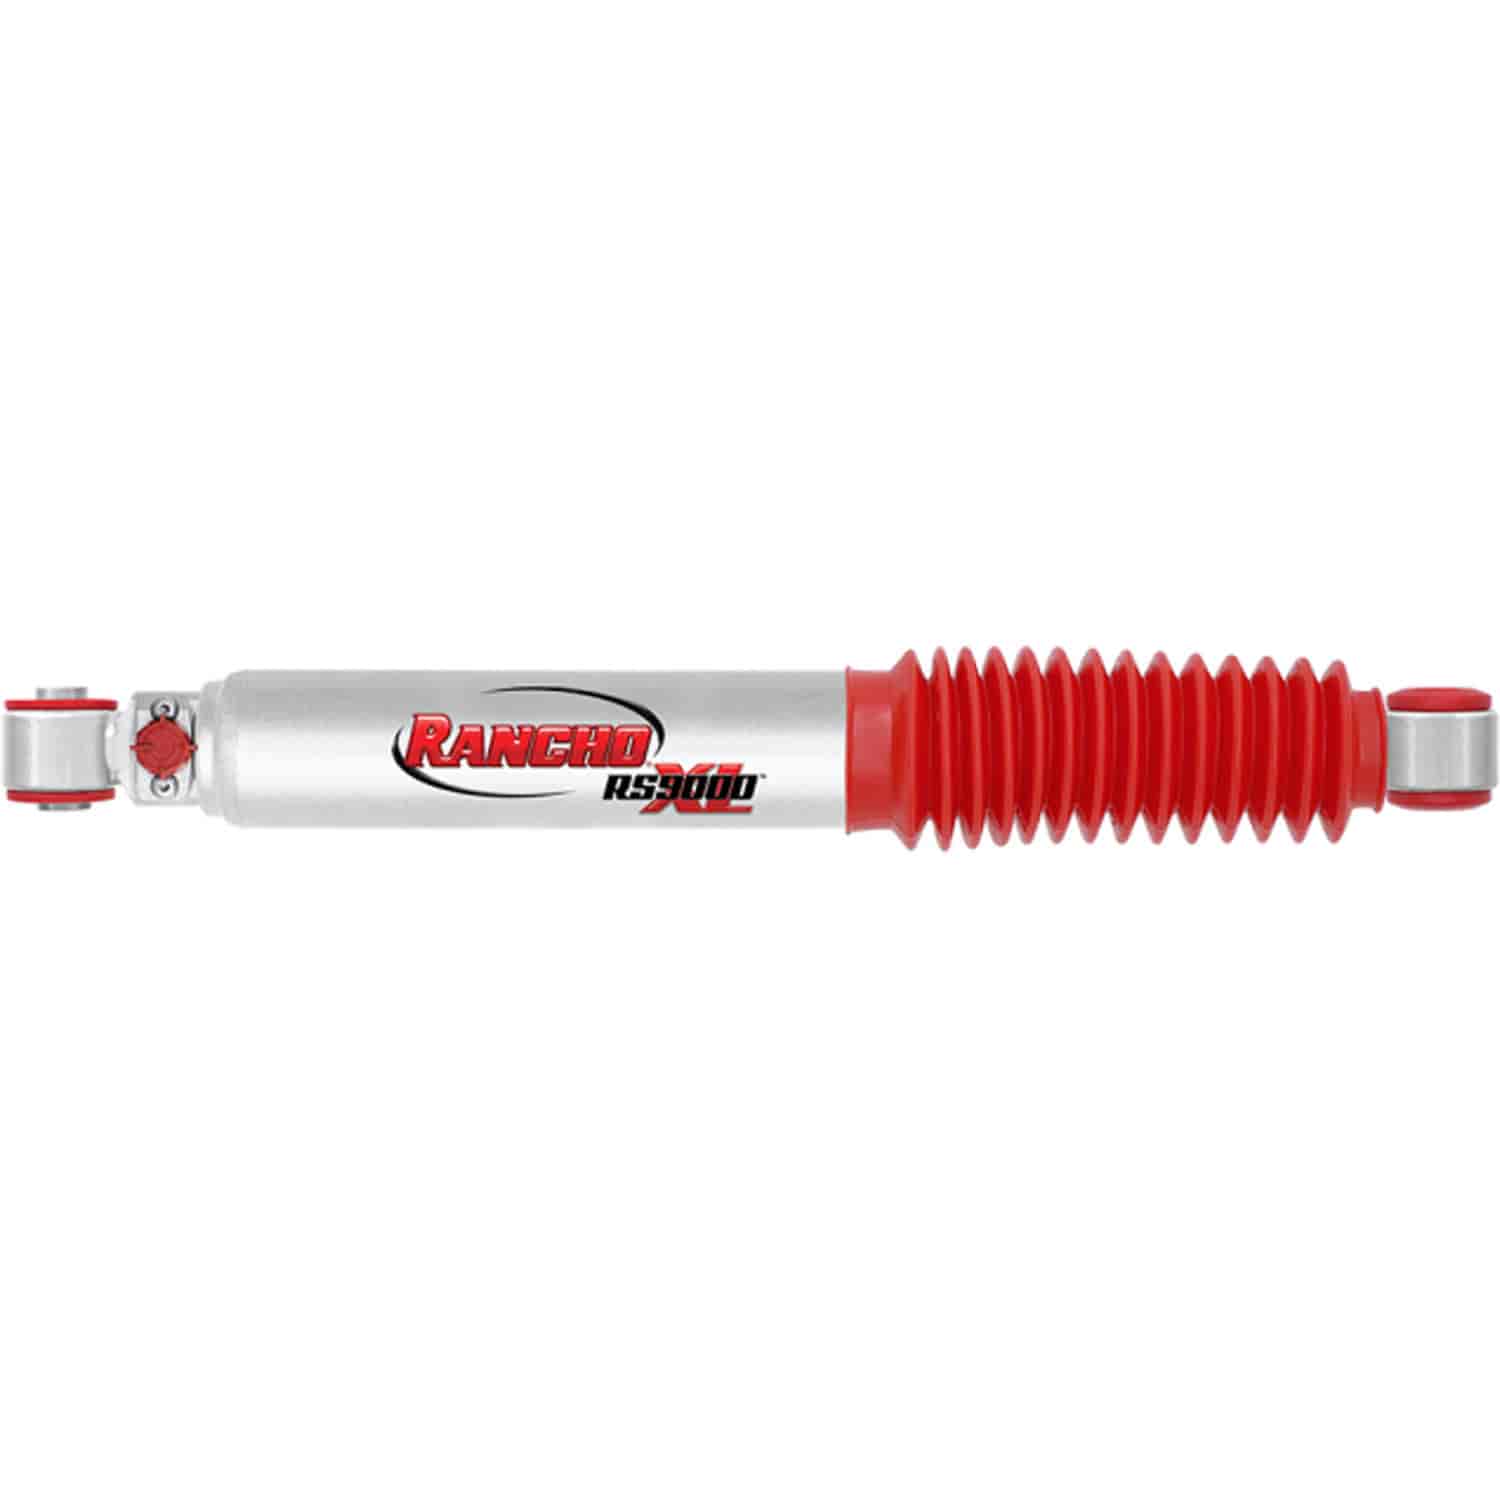 RS9000XL Rear Shock Absorber Fits for Nissan Patrol